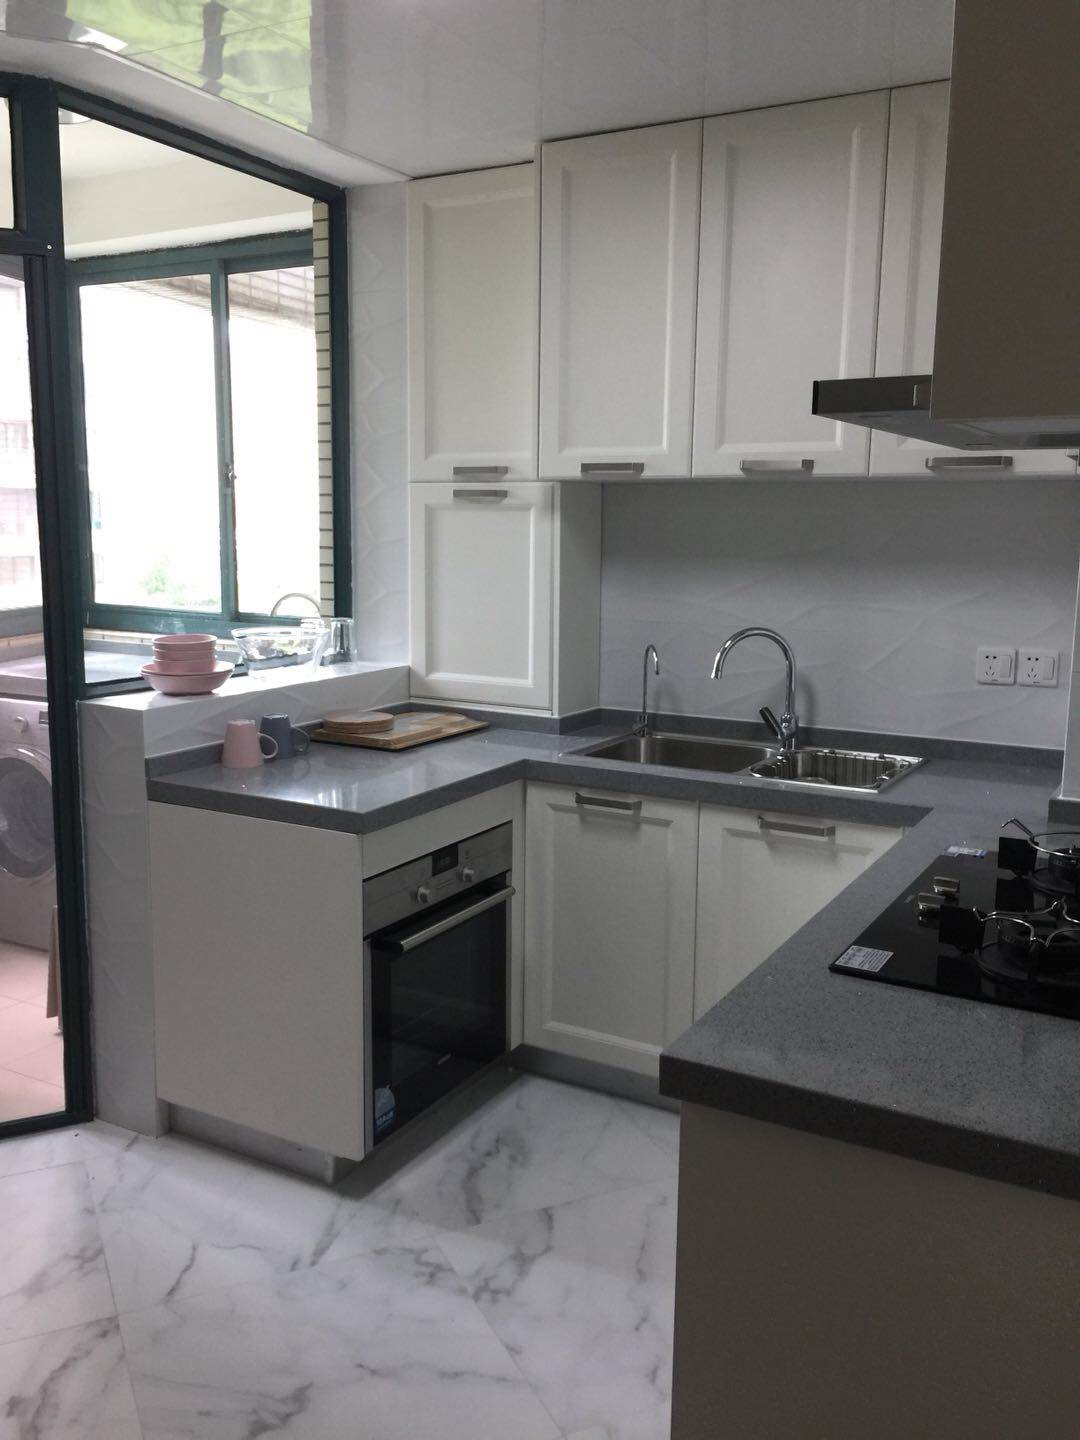  Renovated 3BR Apartment in Good Compound in Xujiahui CBD